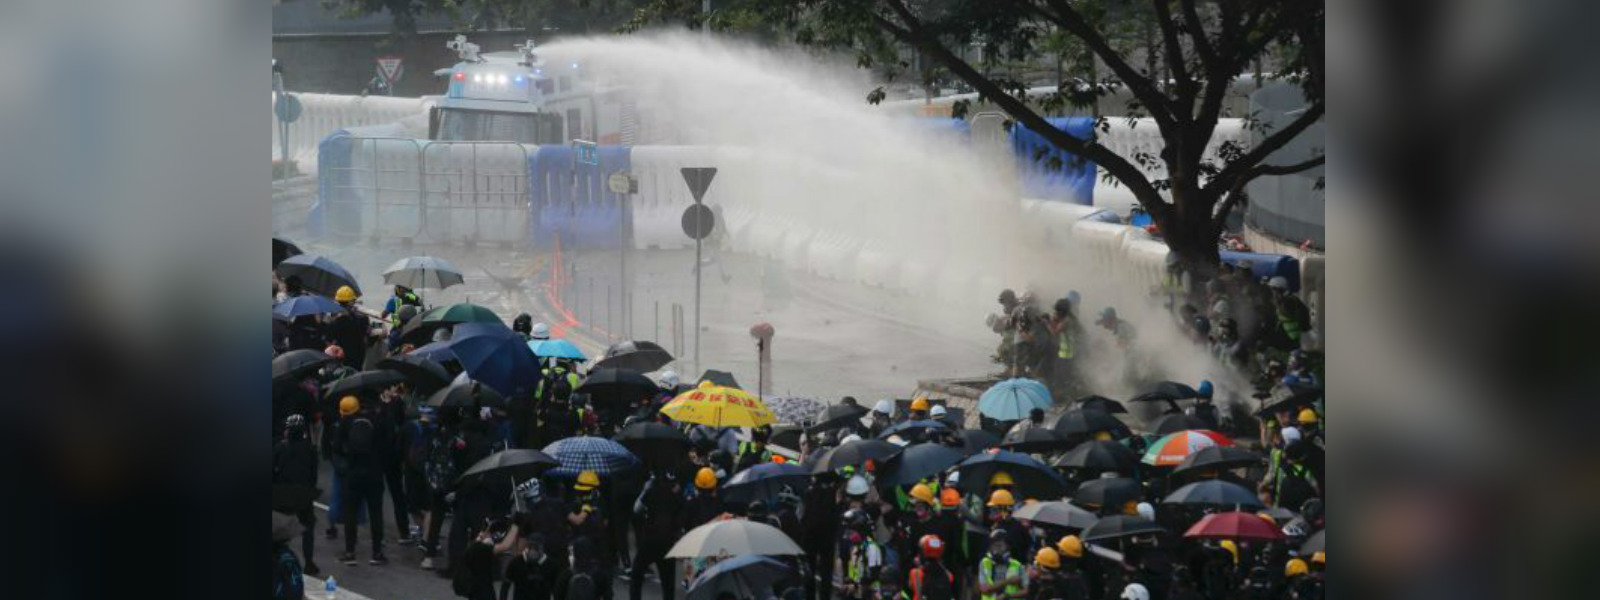 Hong Kong police fire water cannons at protesters